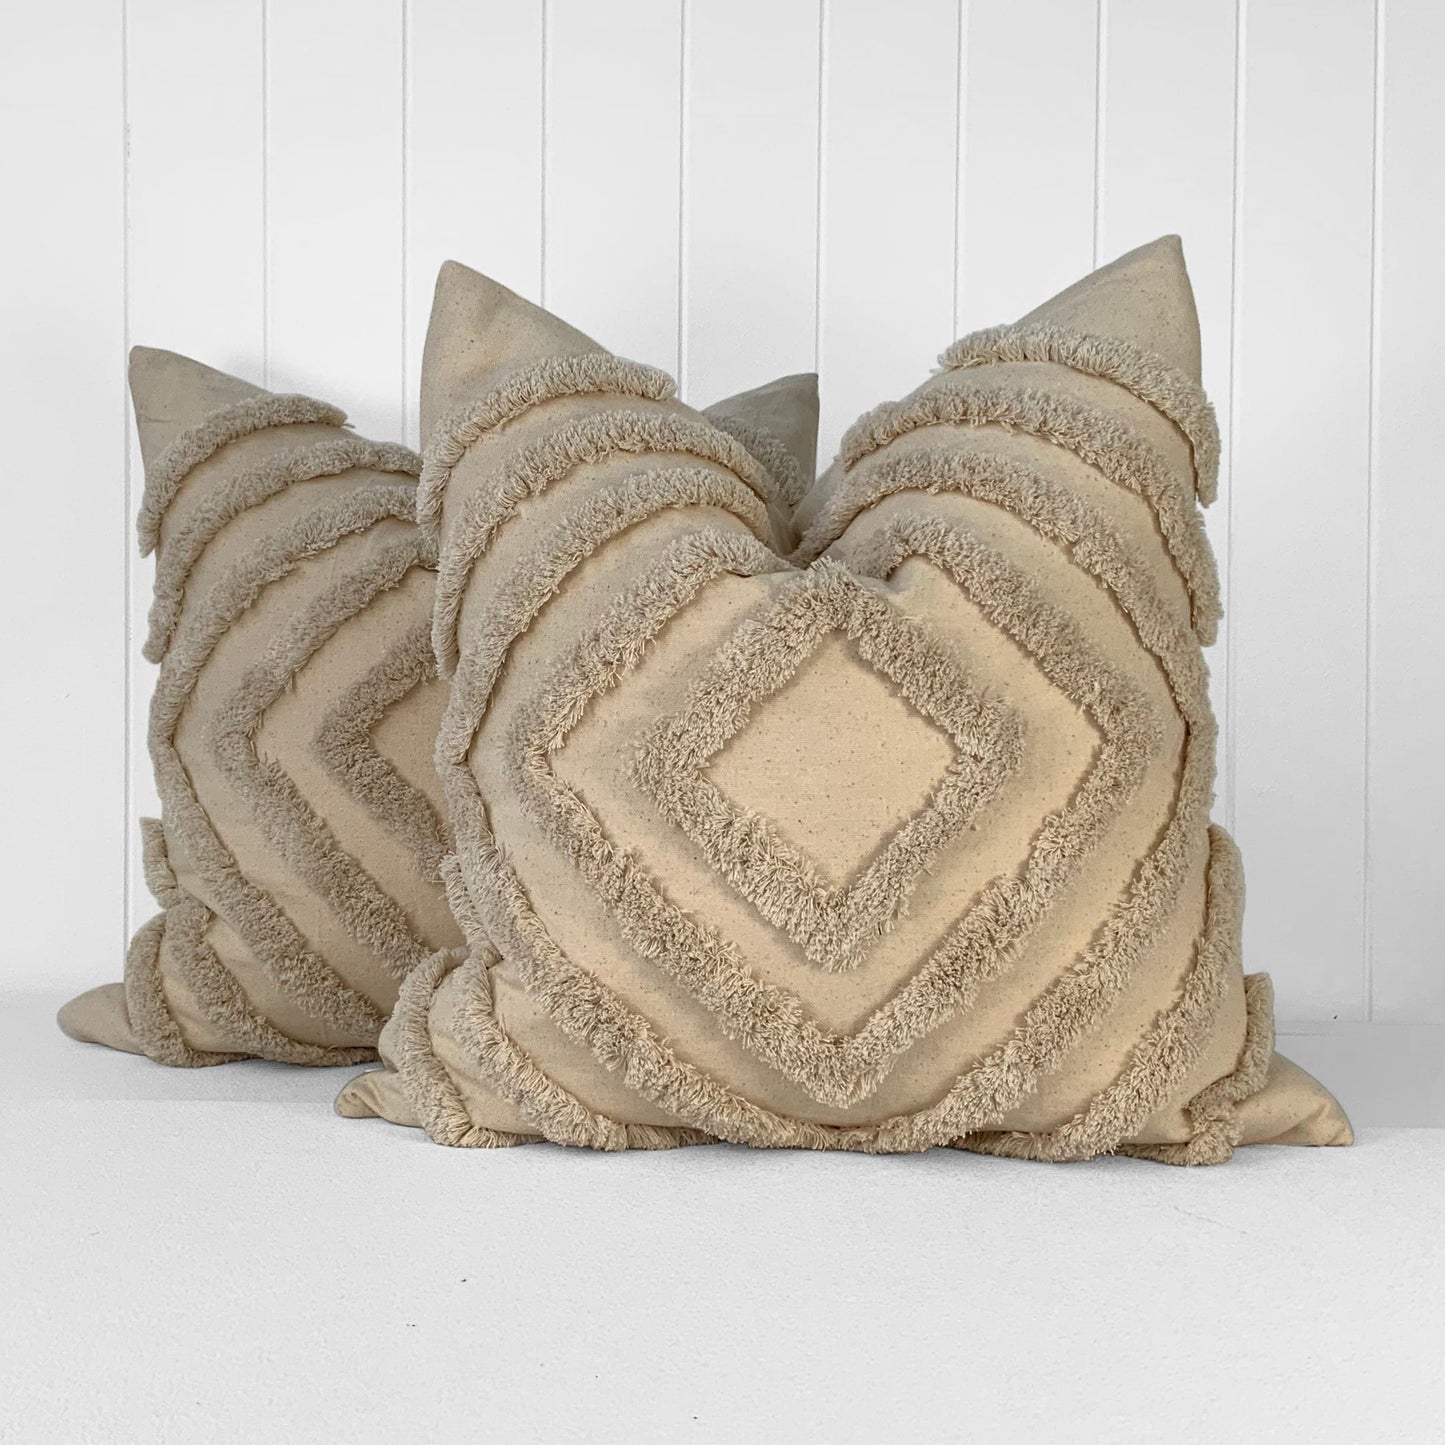 AFGHAN CUSHION | NATURAL CONCENTRIC SQUARES | 55CM X 55CM | CHOOSE FEATHER OR FIBRE FILLING